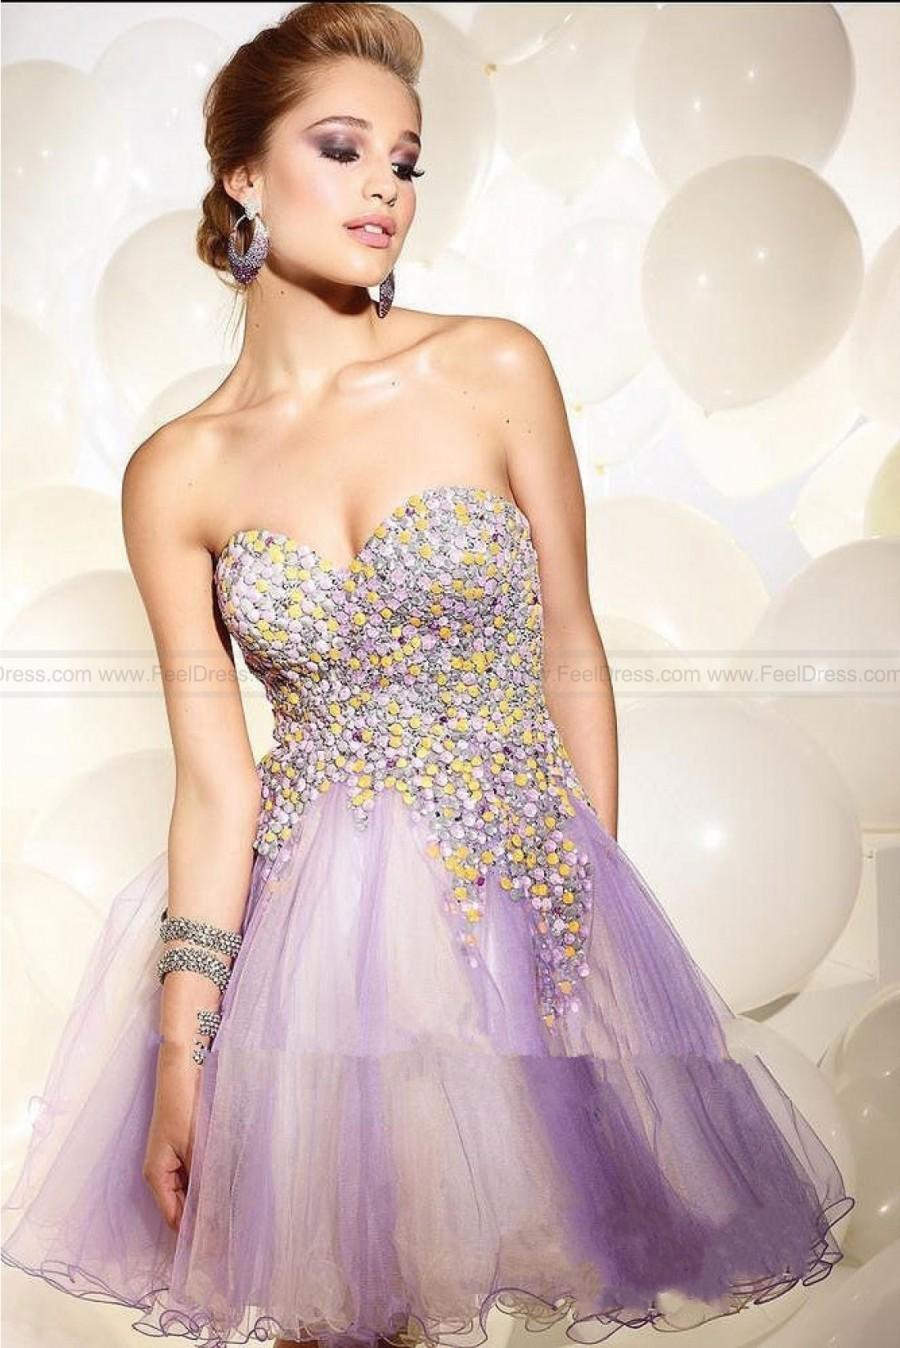 Wedding - Ball Gown A-line Sweetheart Strapless Tulle Cocktail Dress